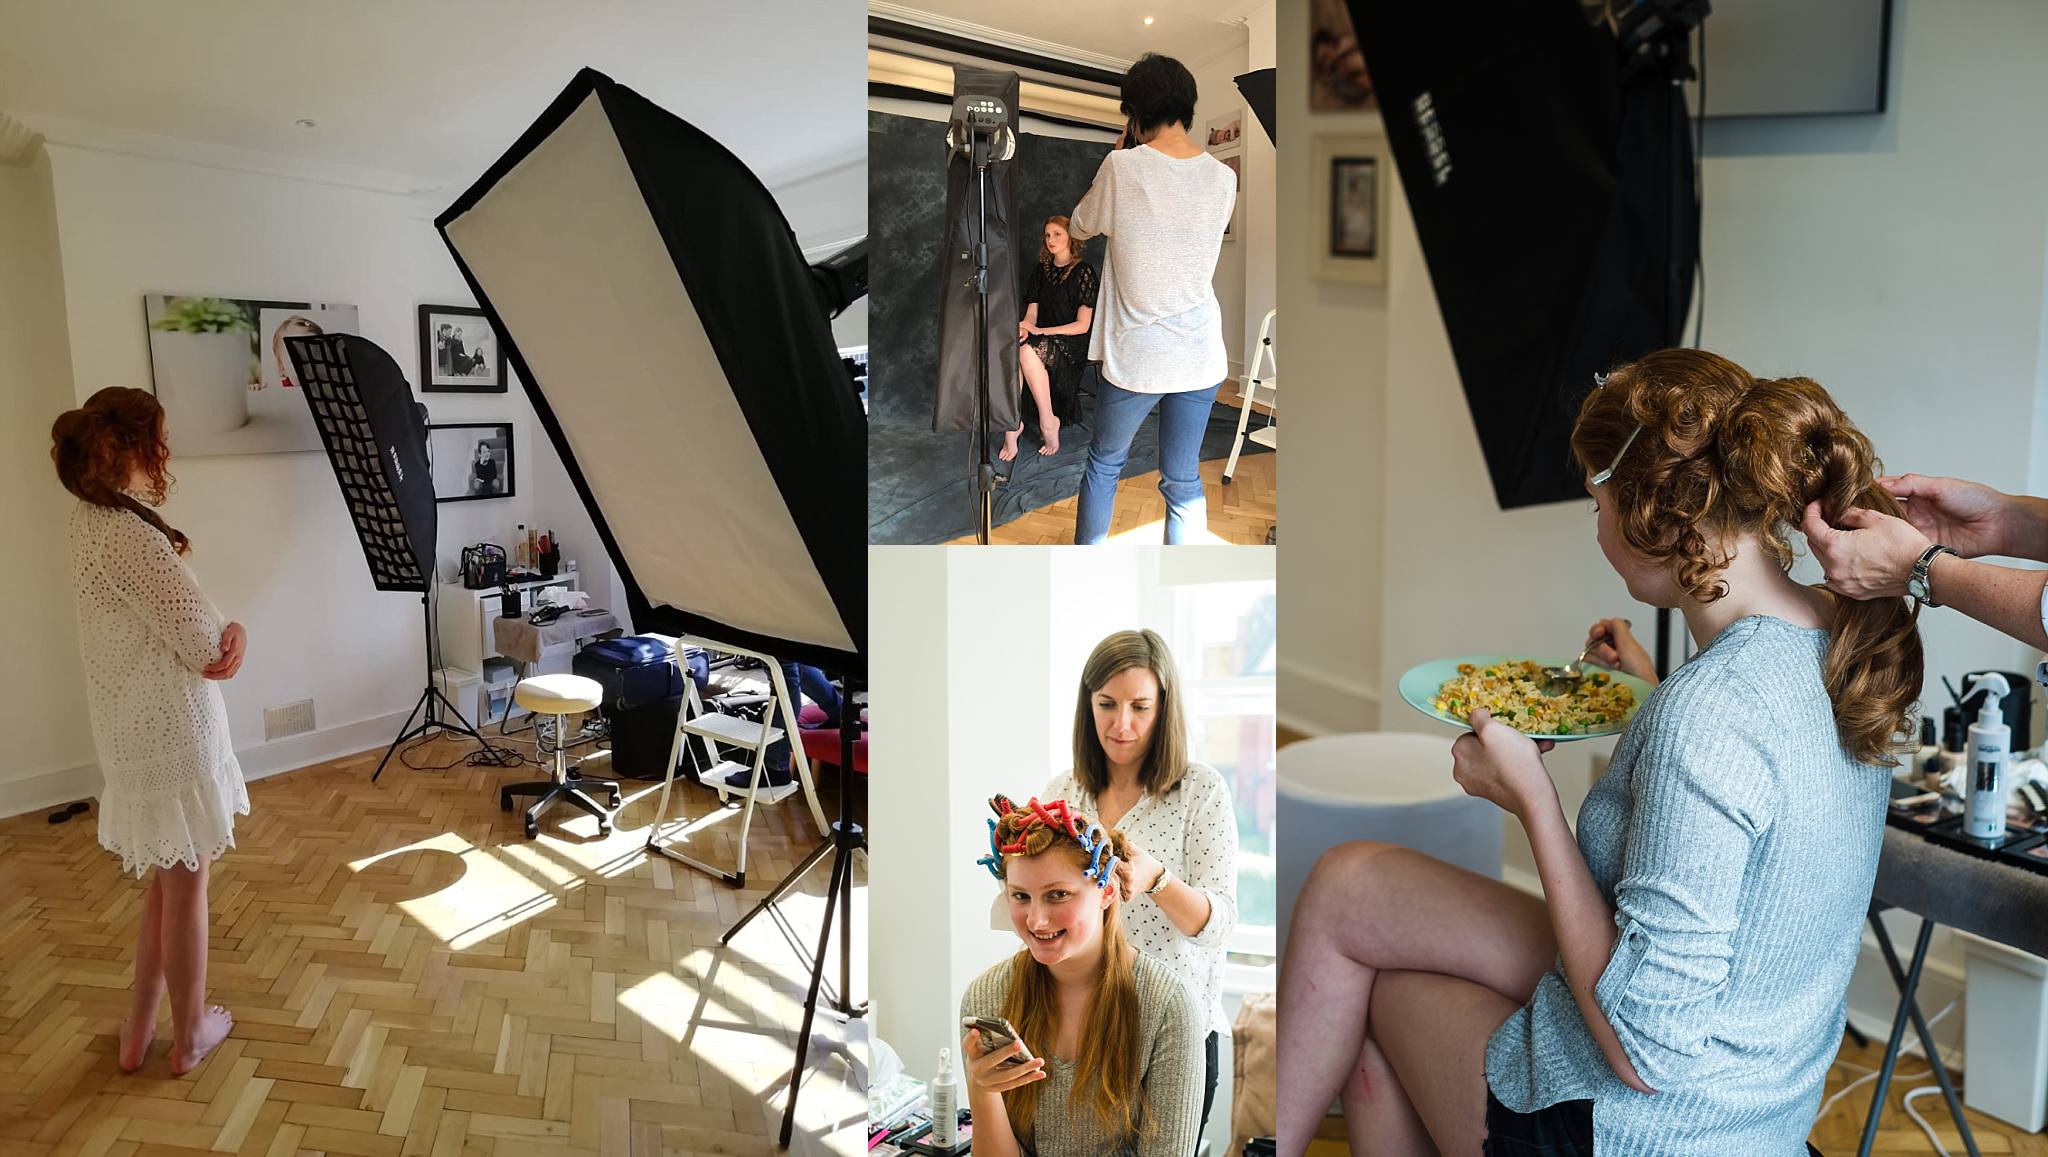 Behind the scenes of a studio photo shoot. Make-up artist and photographer at work